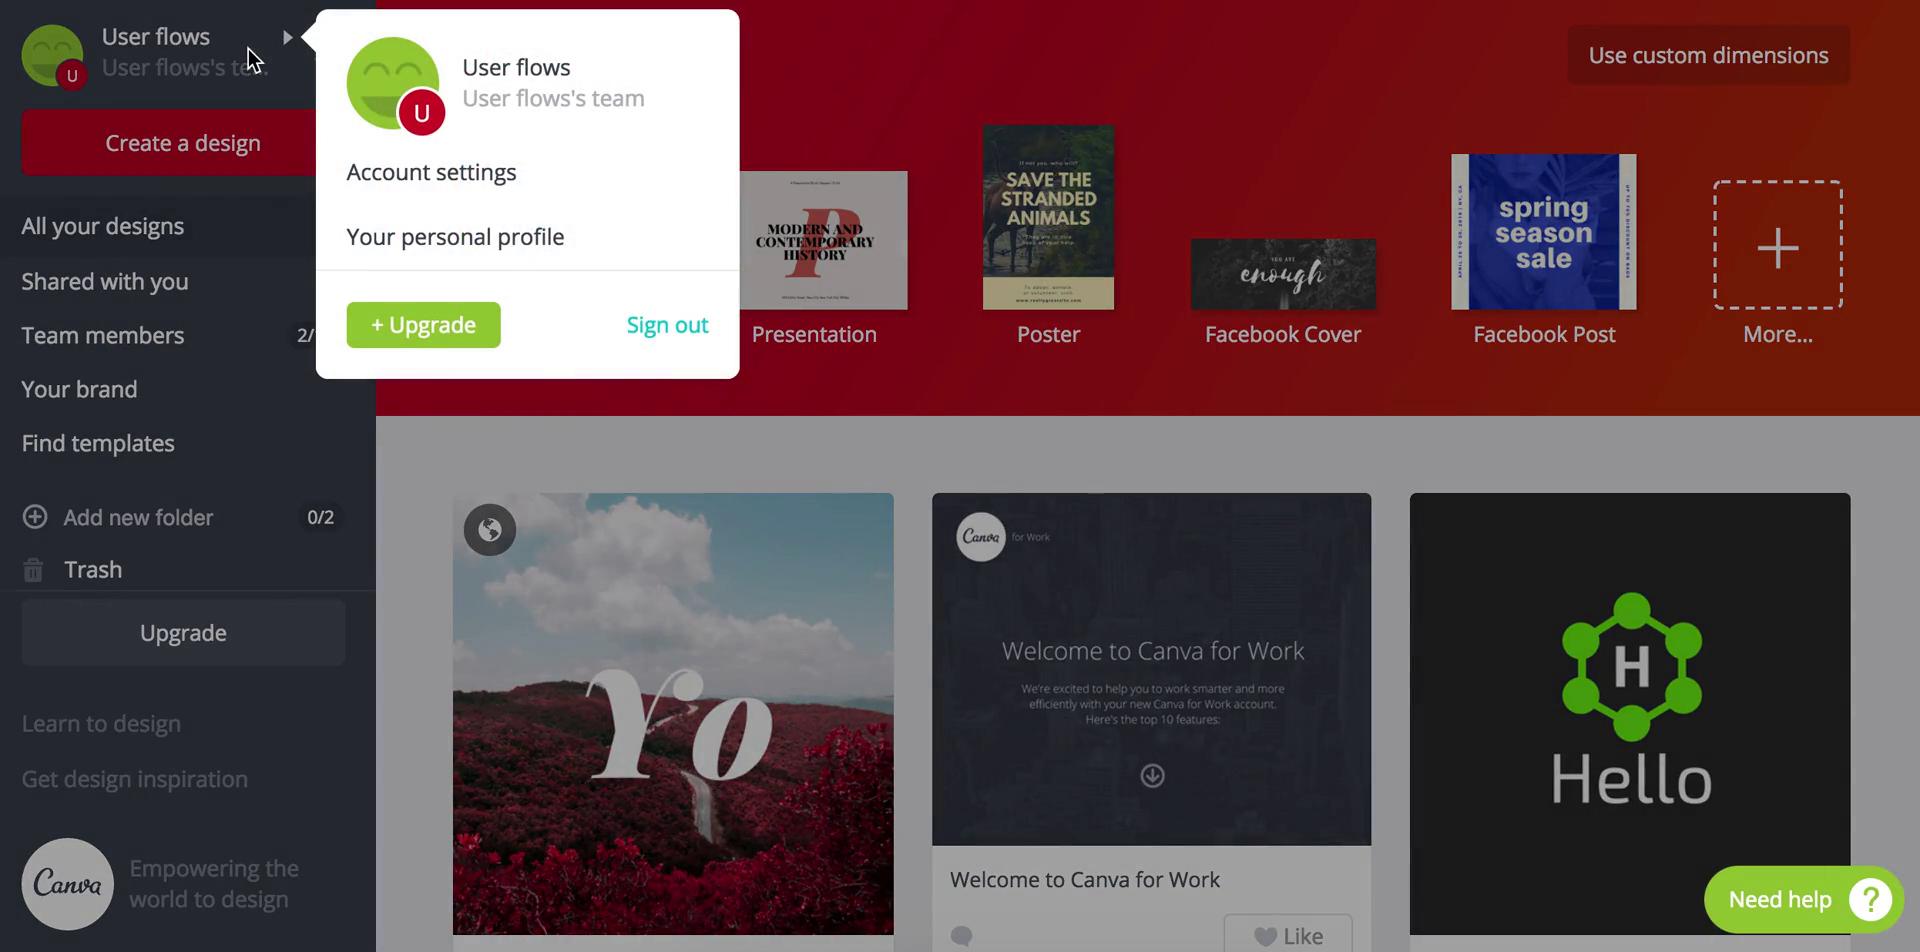 Deactivating your account on Canva video screenshot